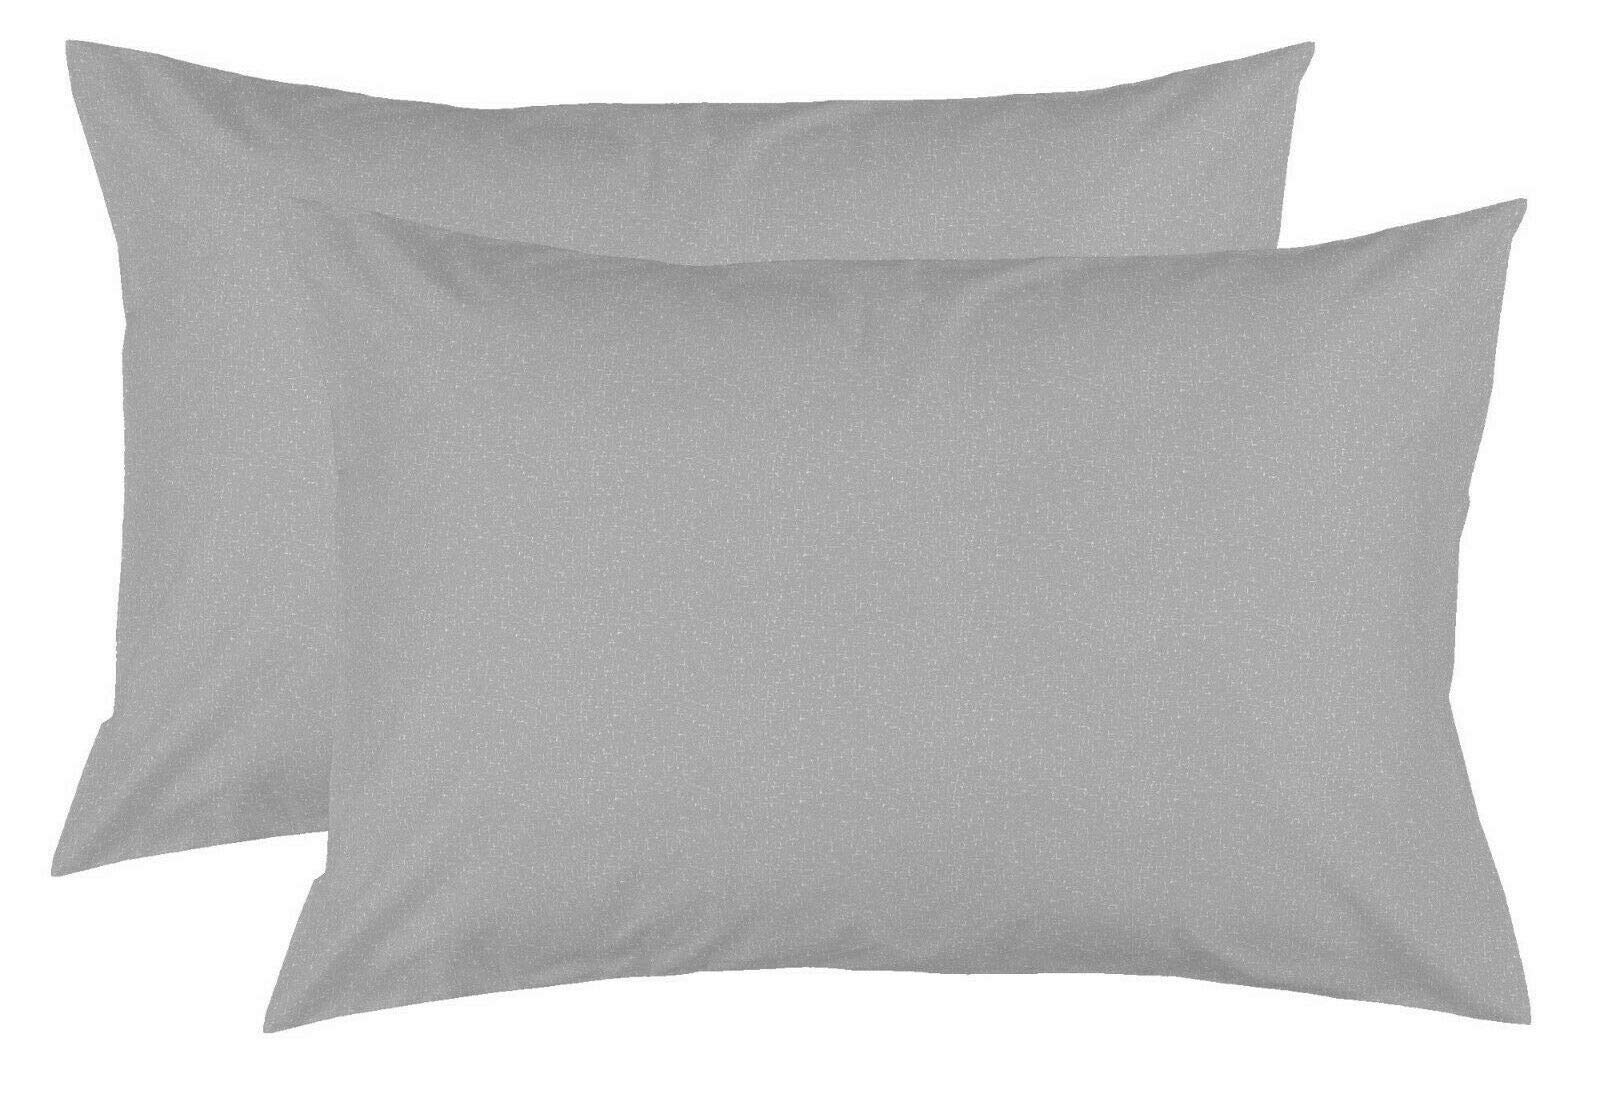 Pair Of Housewife Pillow Cases | Plain Dyed Pillowcase Polycotton | Machine Washable, Easy Care| UK Standard Size - 50x75cm (Silver)